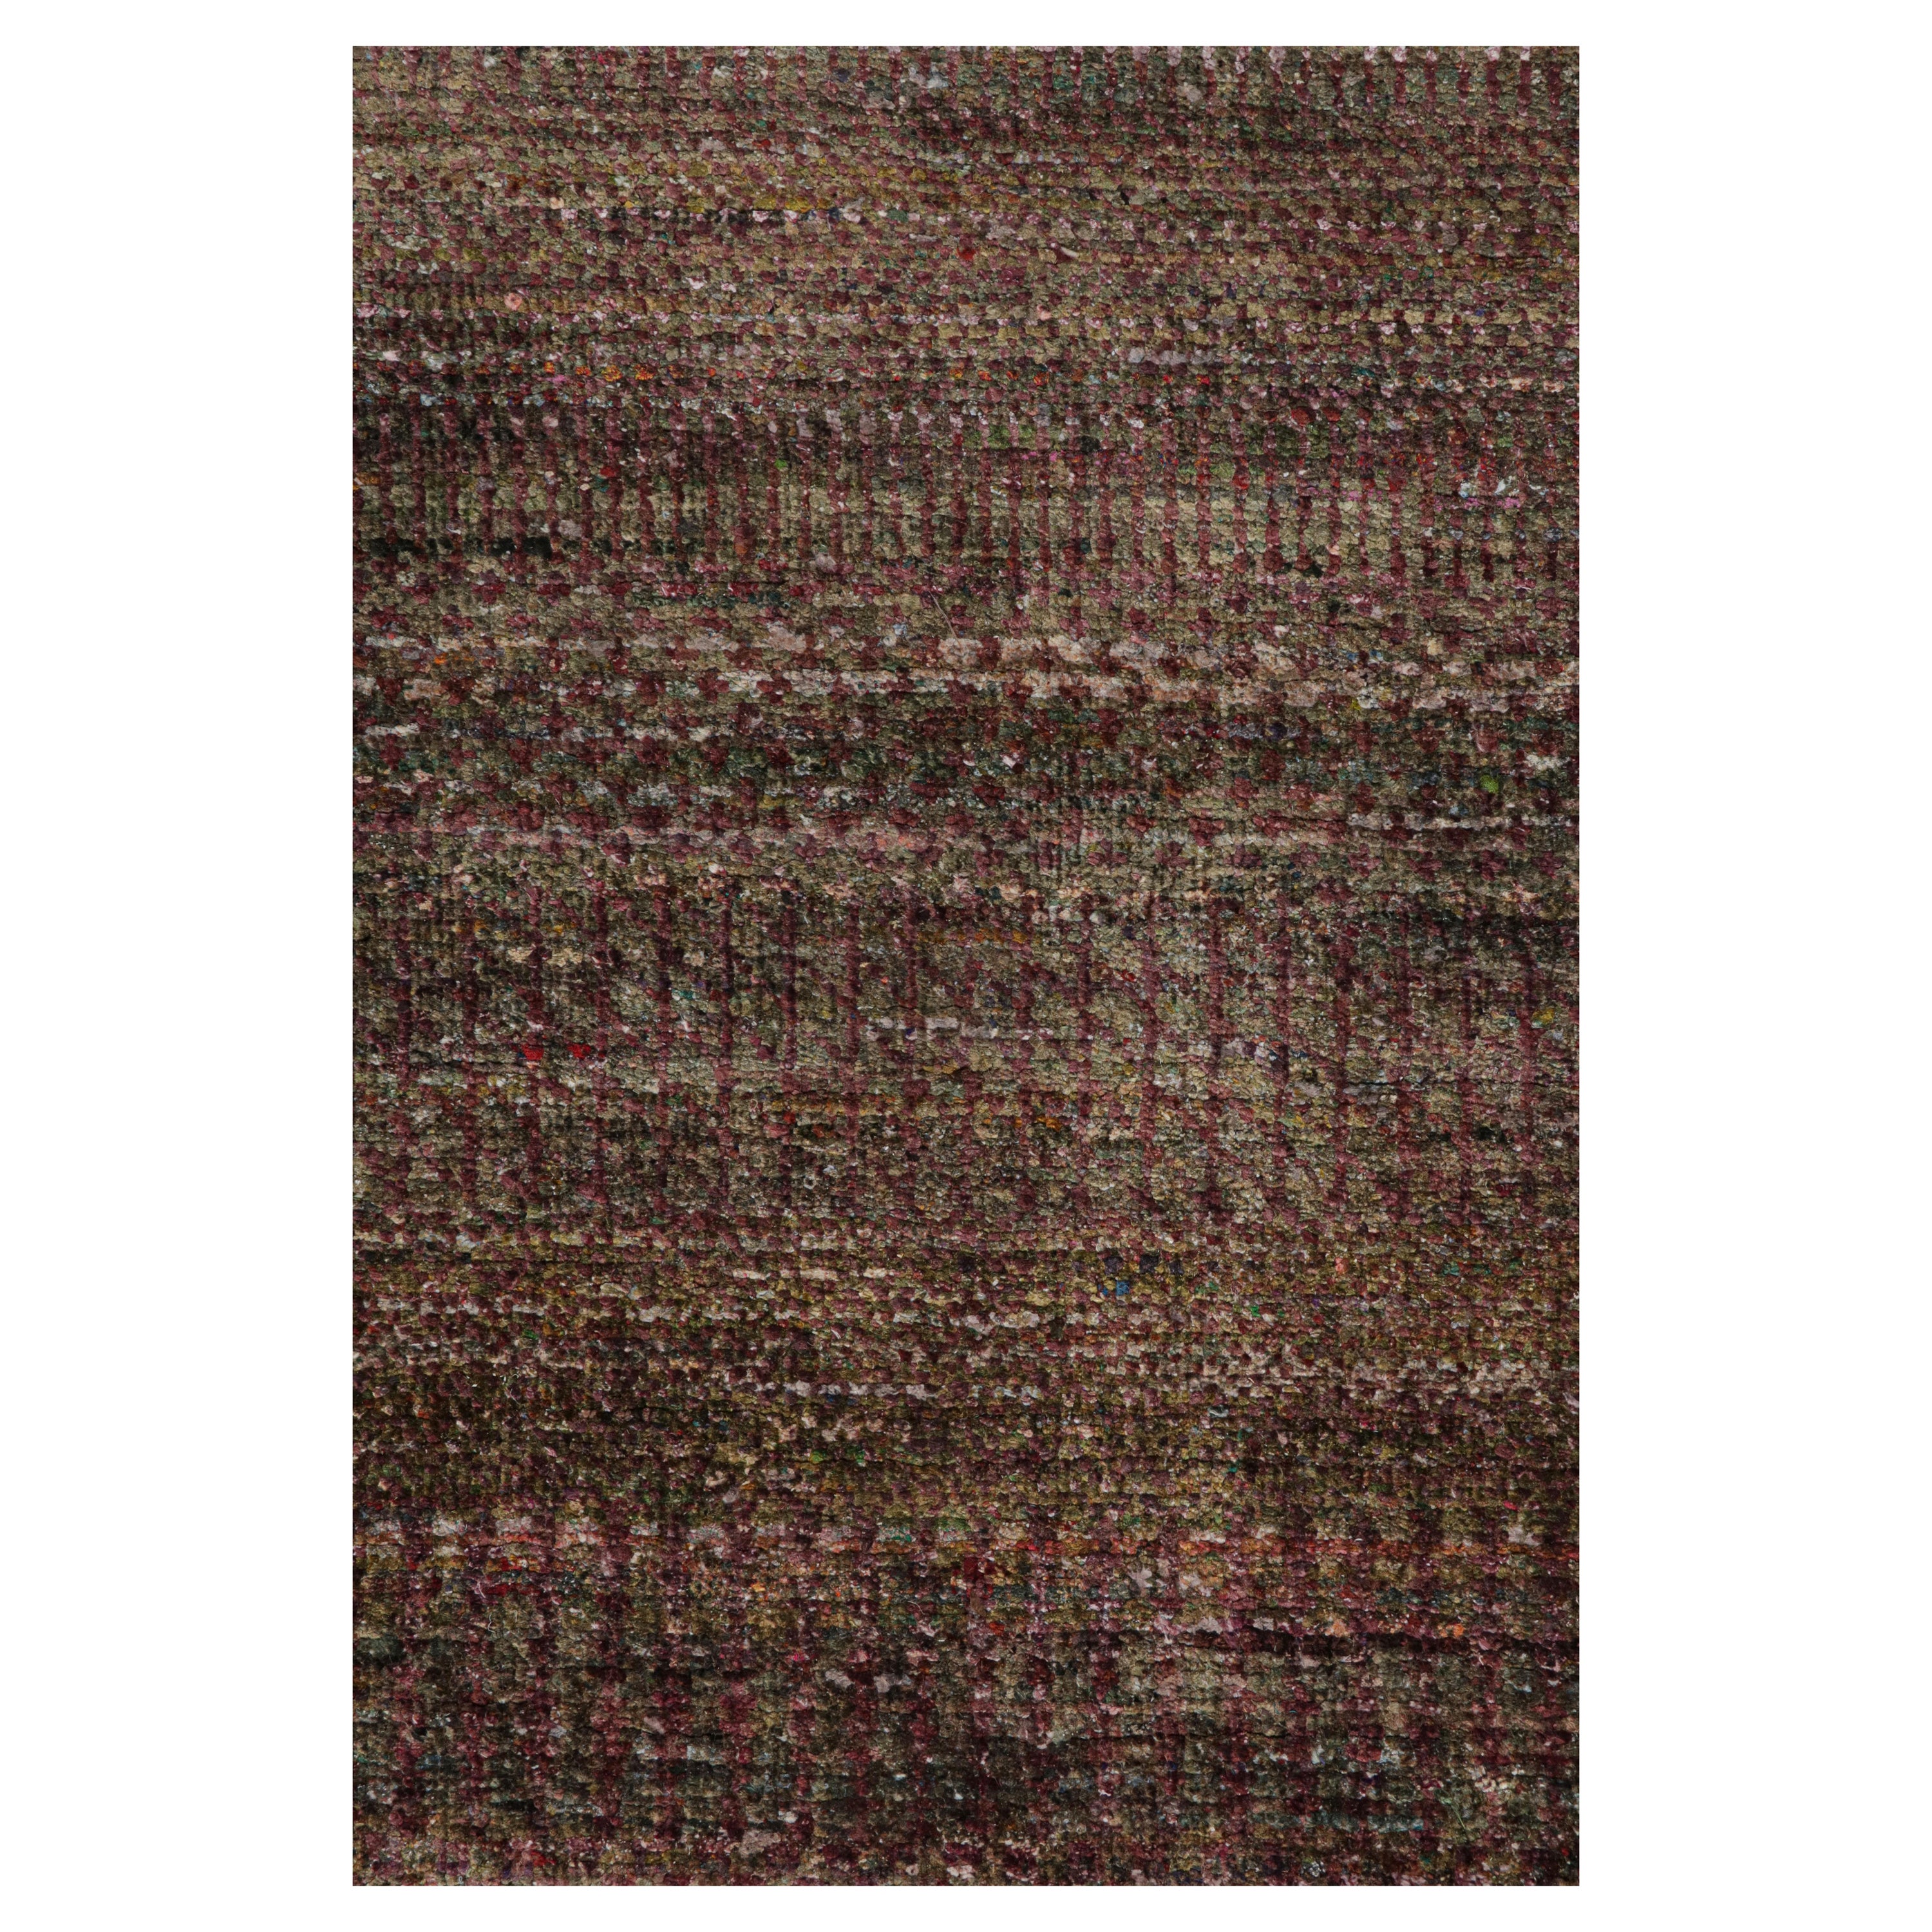 Rug & Kilim’s Textural Rug in Purple Tones and Polychrome Striae